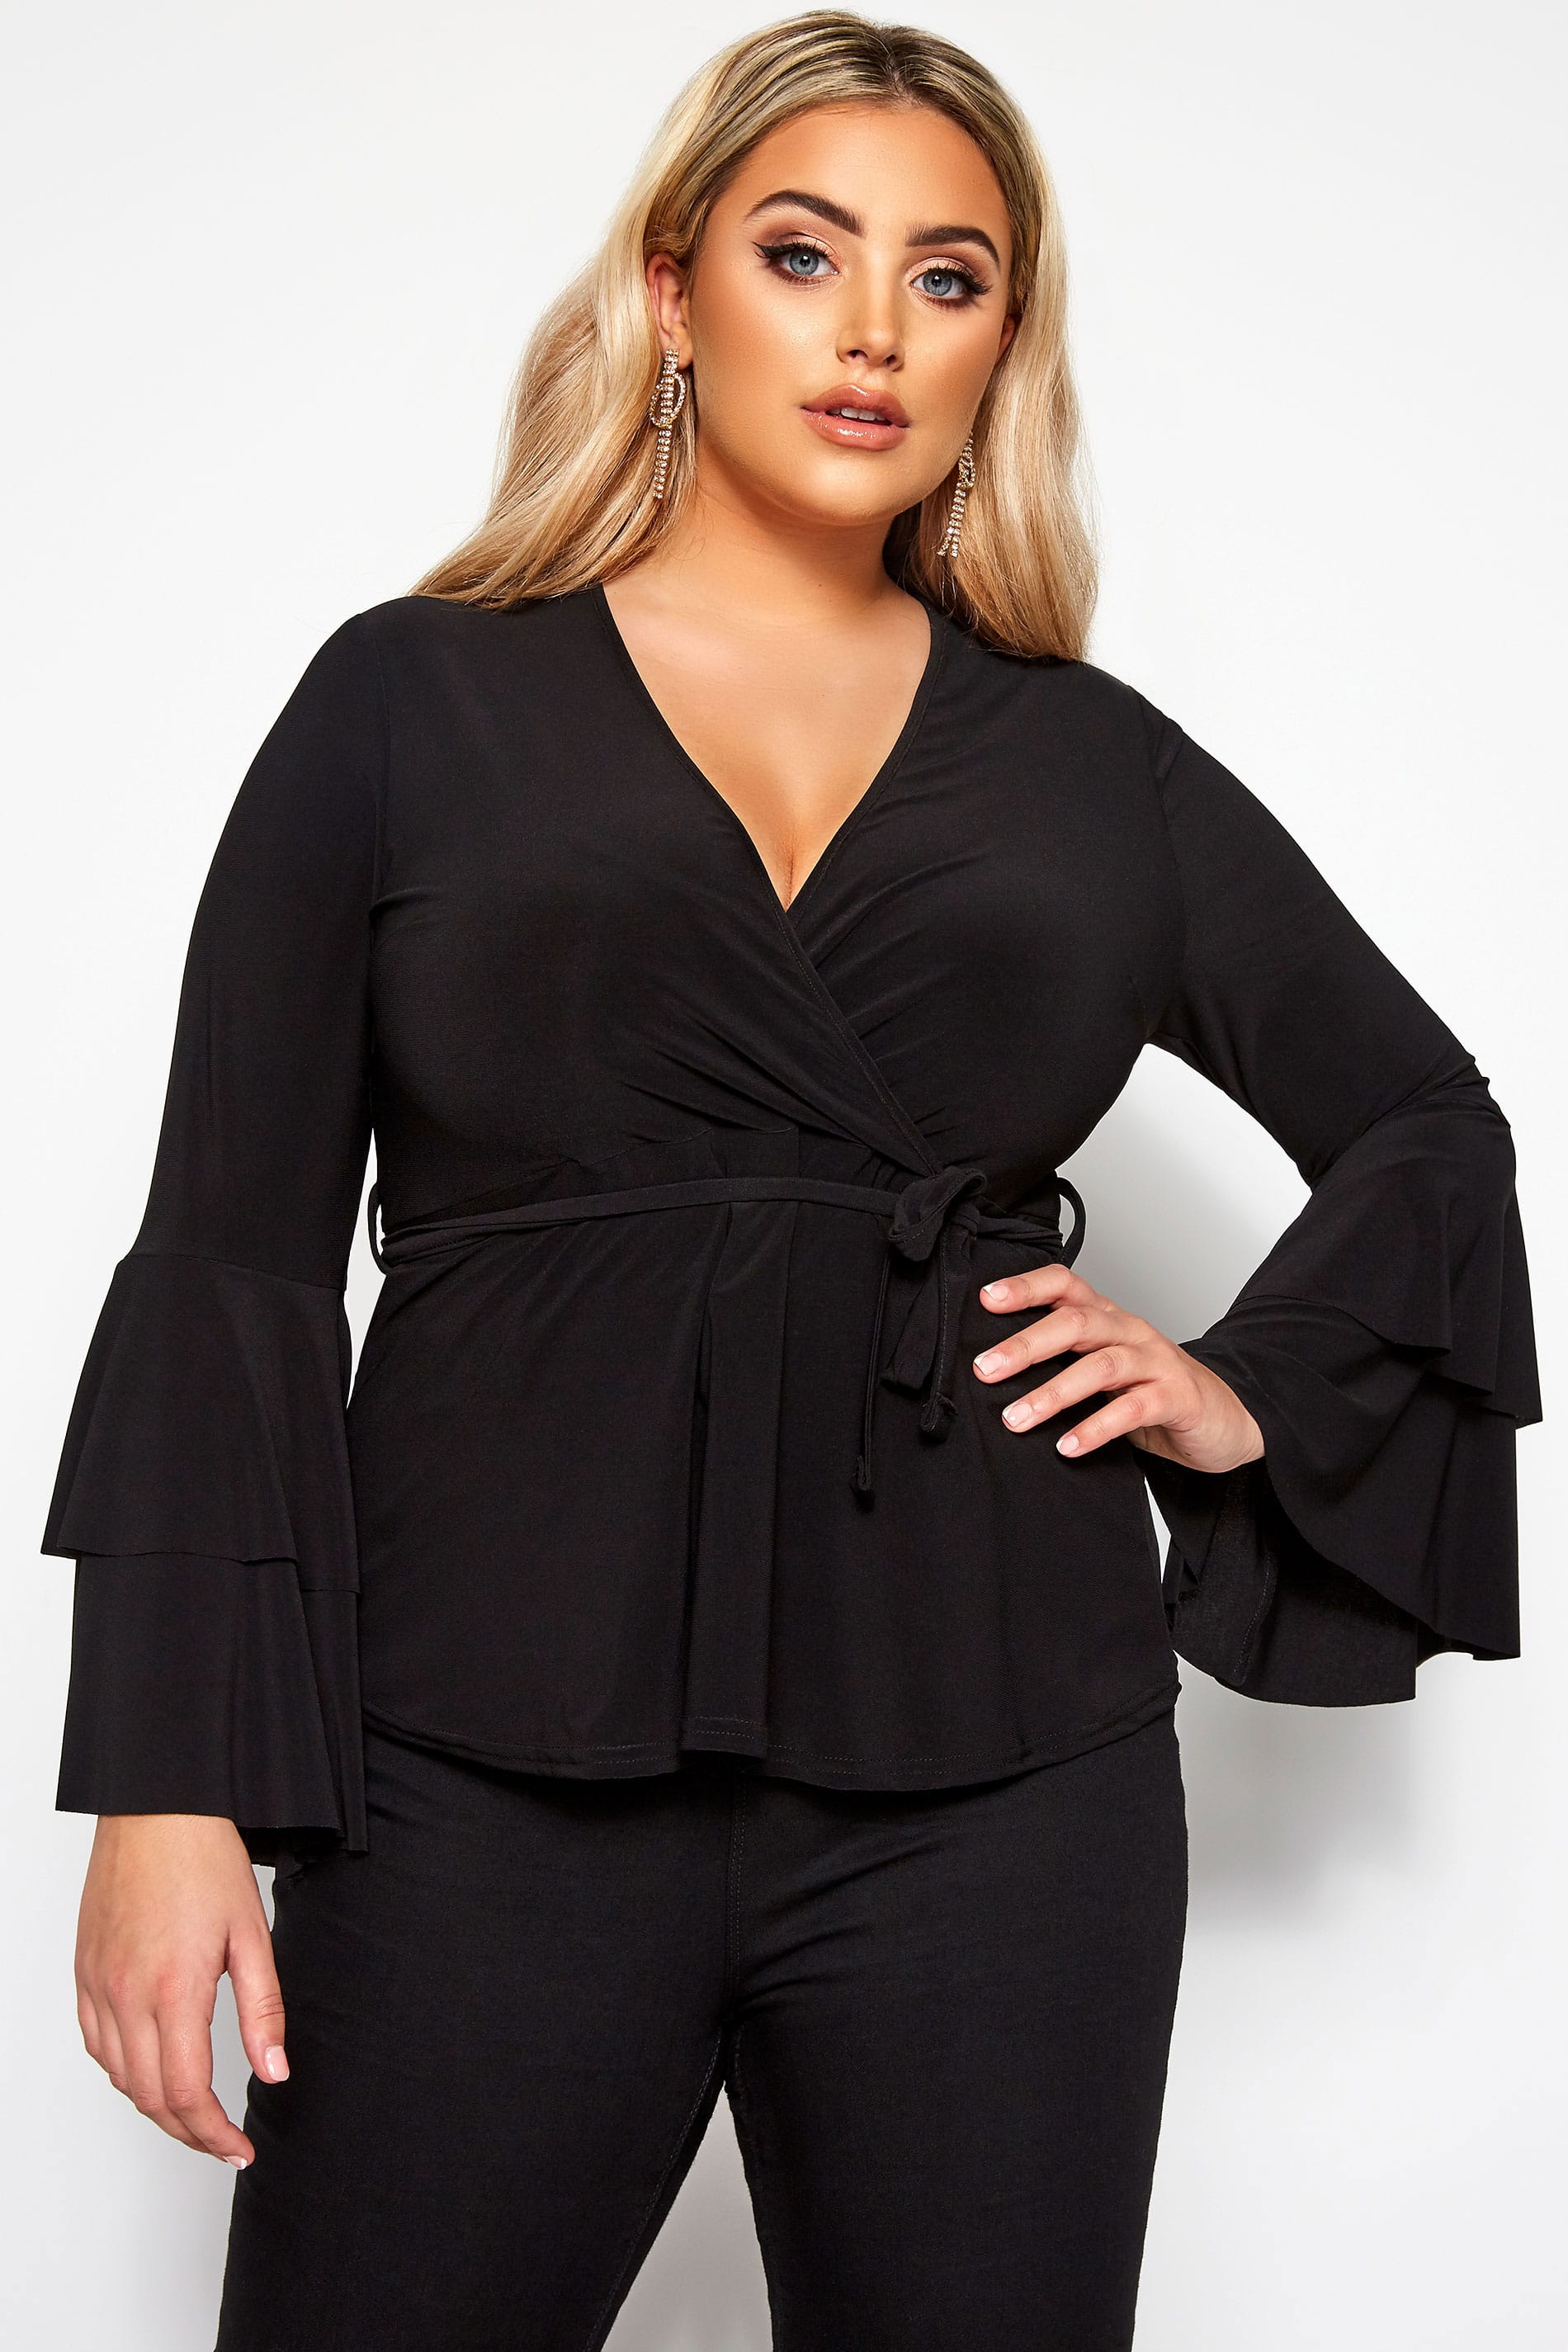 LIMITED COLLECTION Black Frill Sleeve Wrap Top | Yours Clothing 2